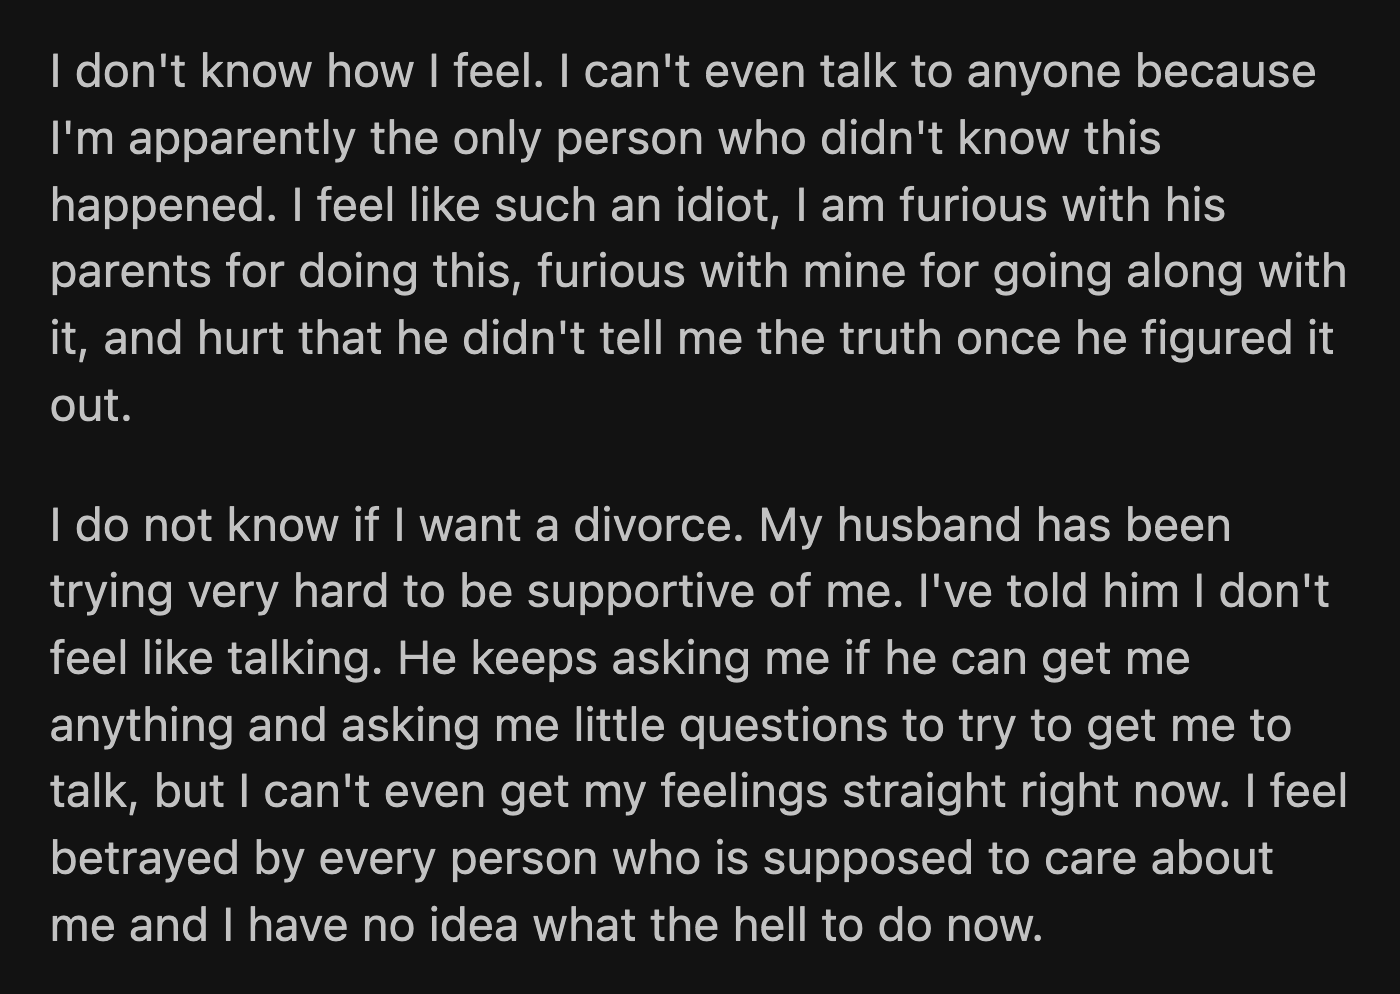 He tried to reassure her that their relationship remained true despite its origins. OP is more confused than ever and is unsure if she wants to stay married.